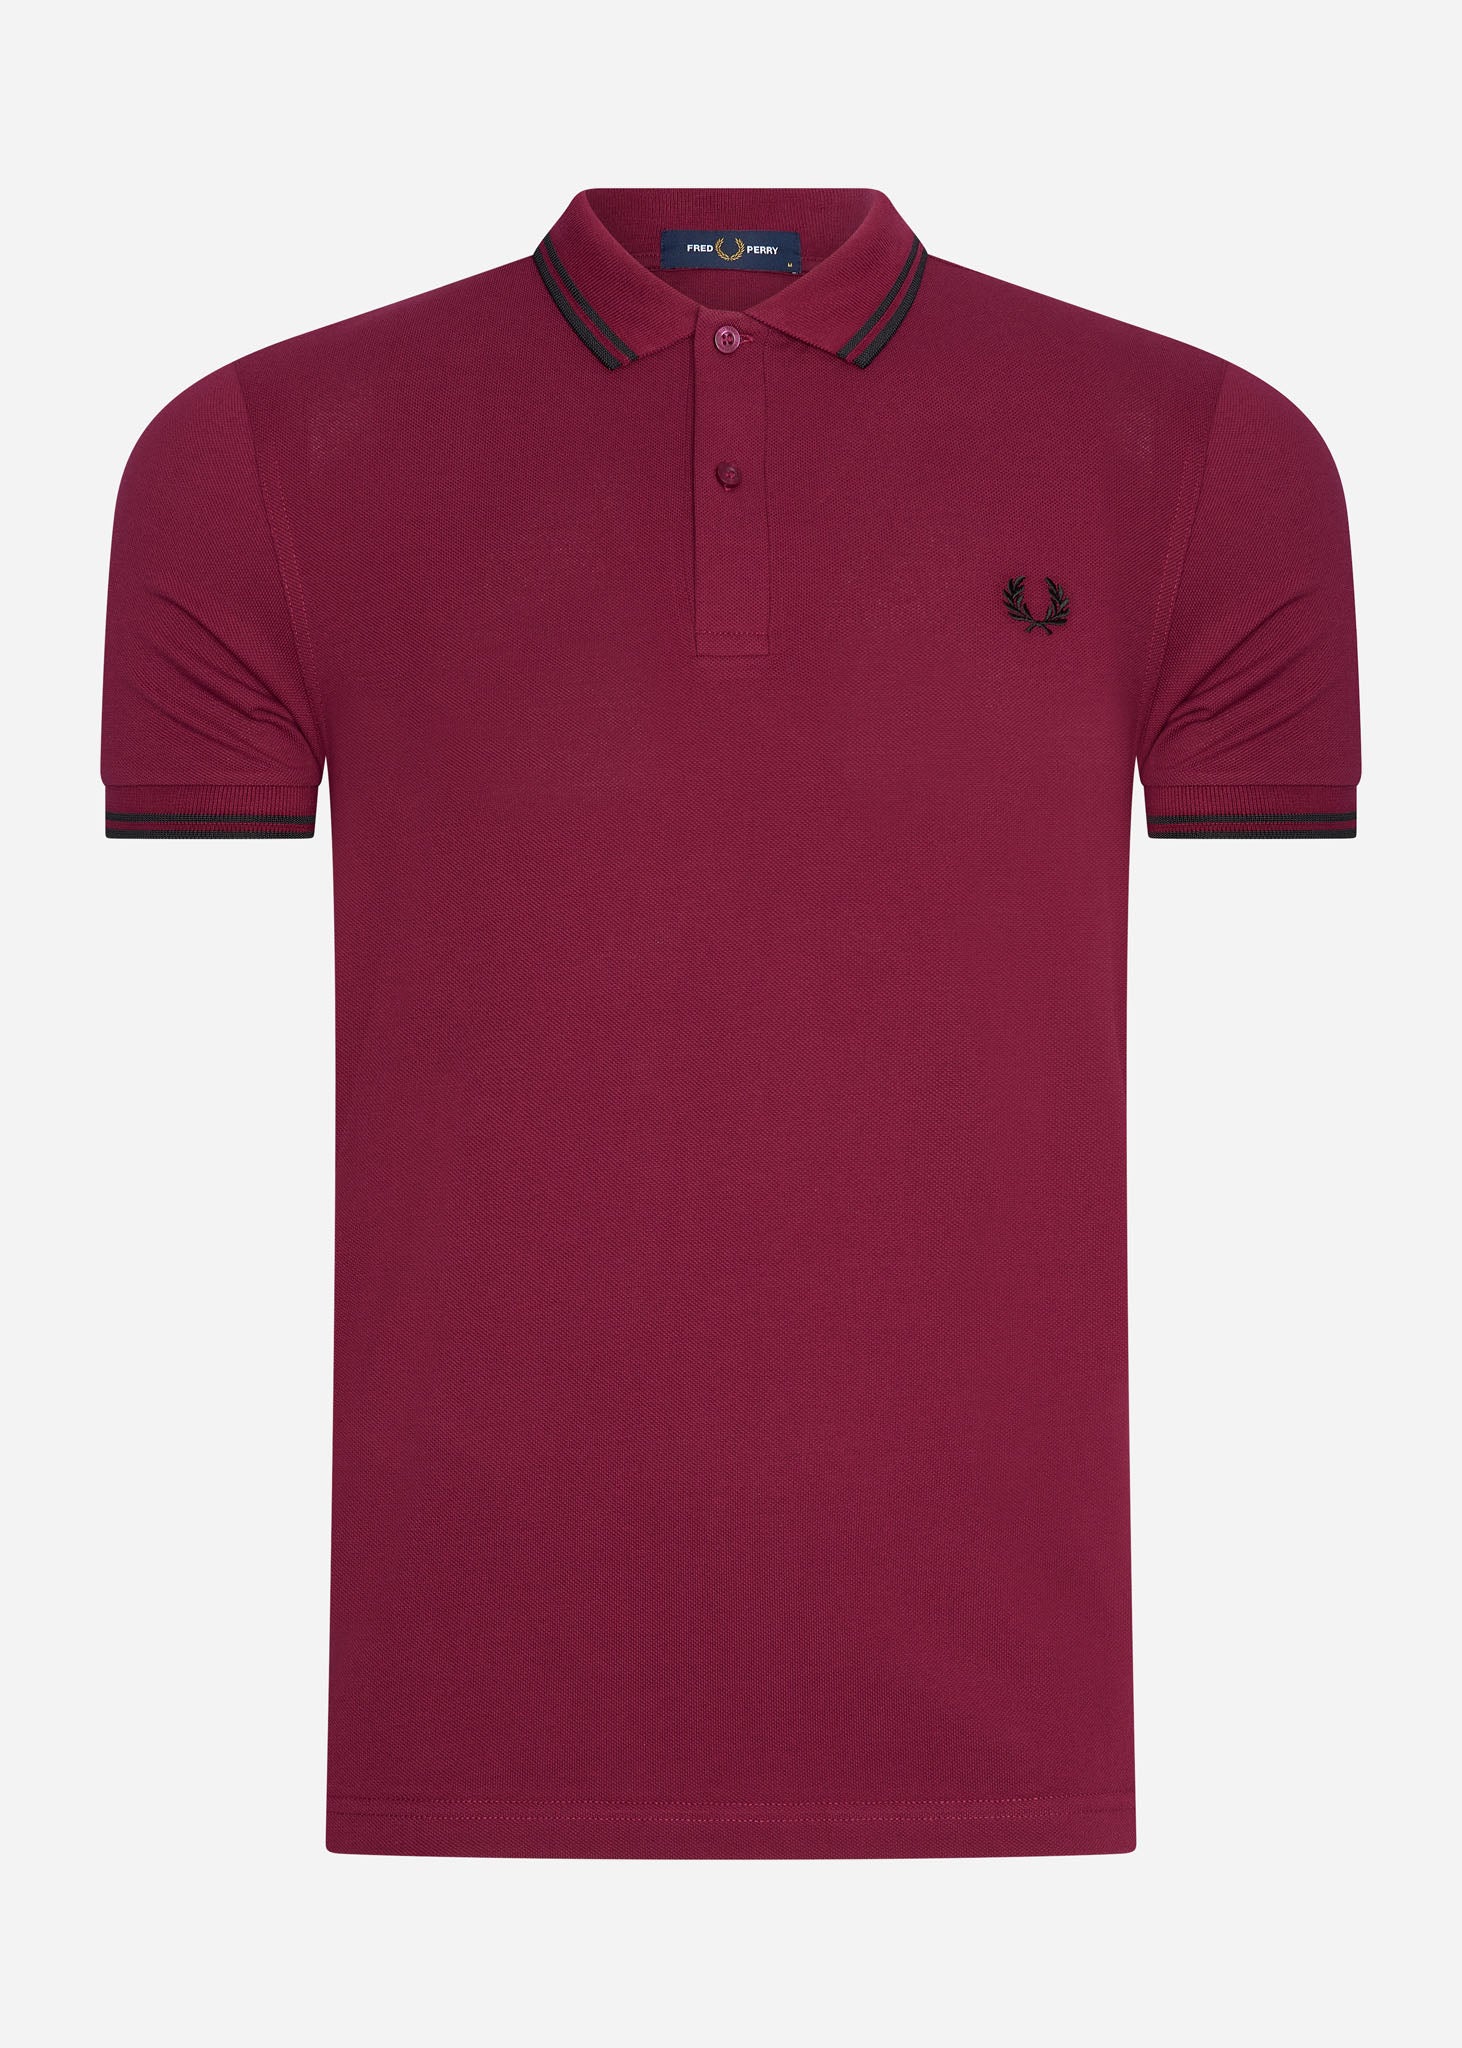 fred perry polo tawny port